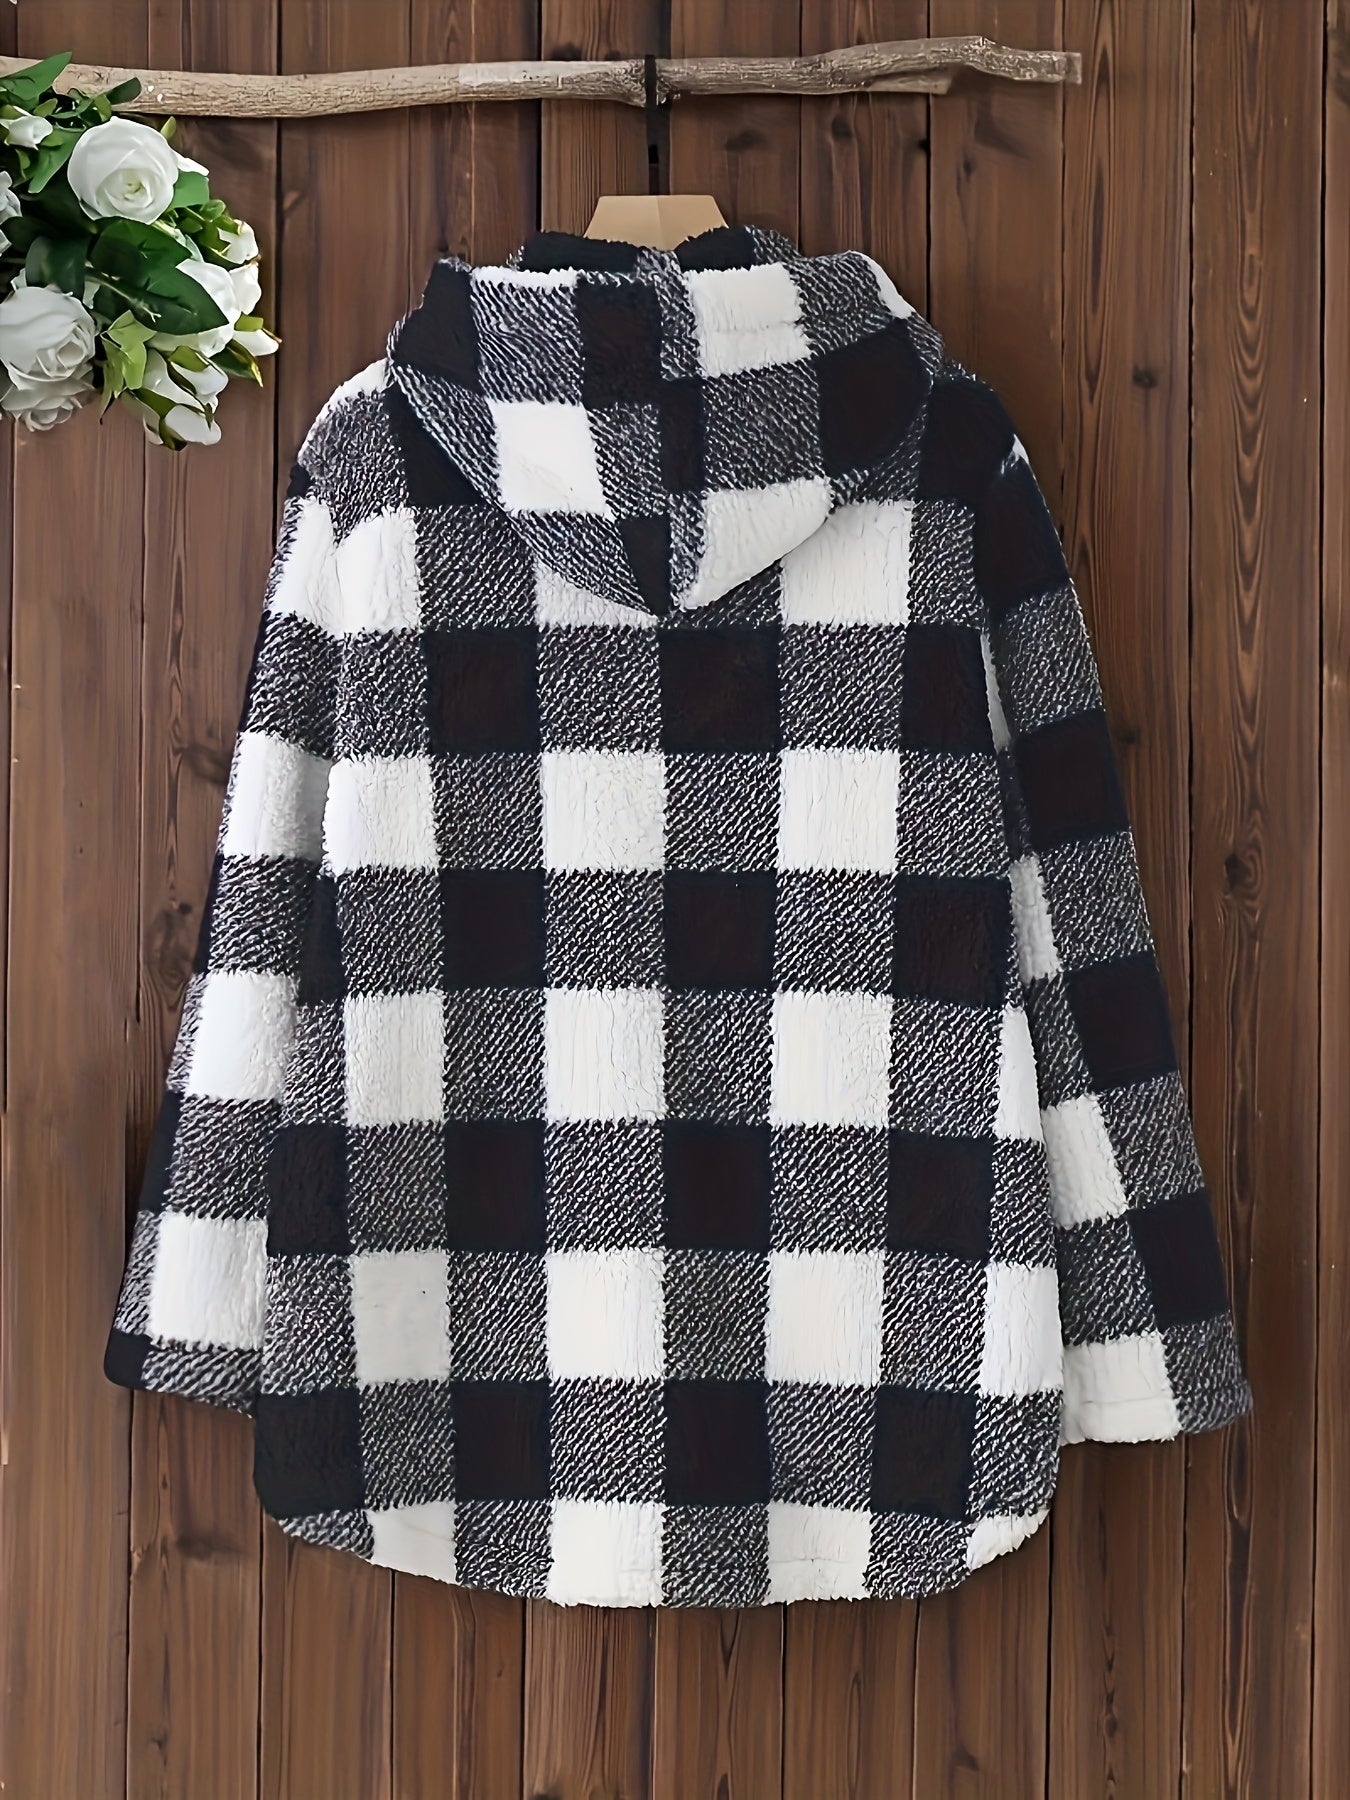 vlovelaw  Plaid Button Up Fuzzy Hoodie, Casual Long Sleeve Pocket Hoodies Coat, Women's Clothing